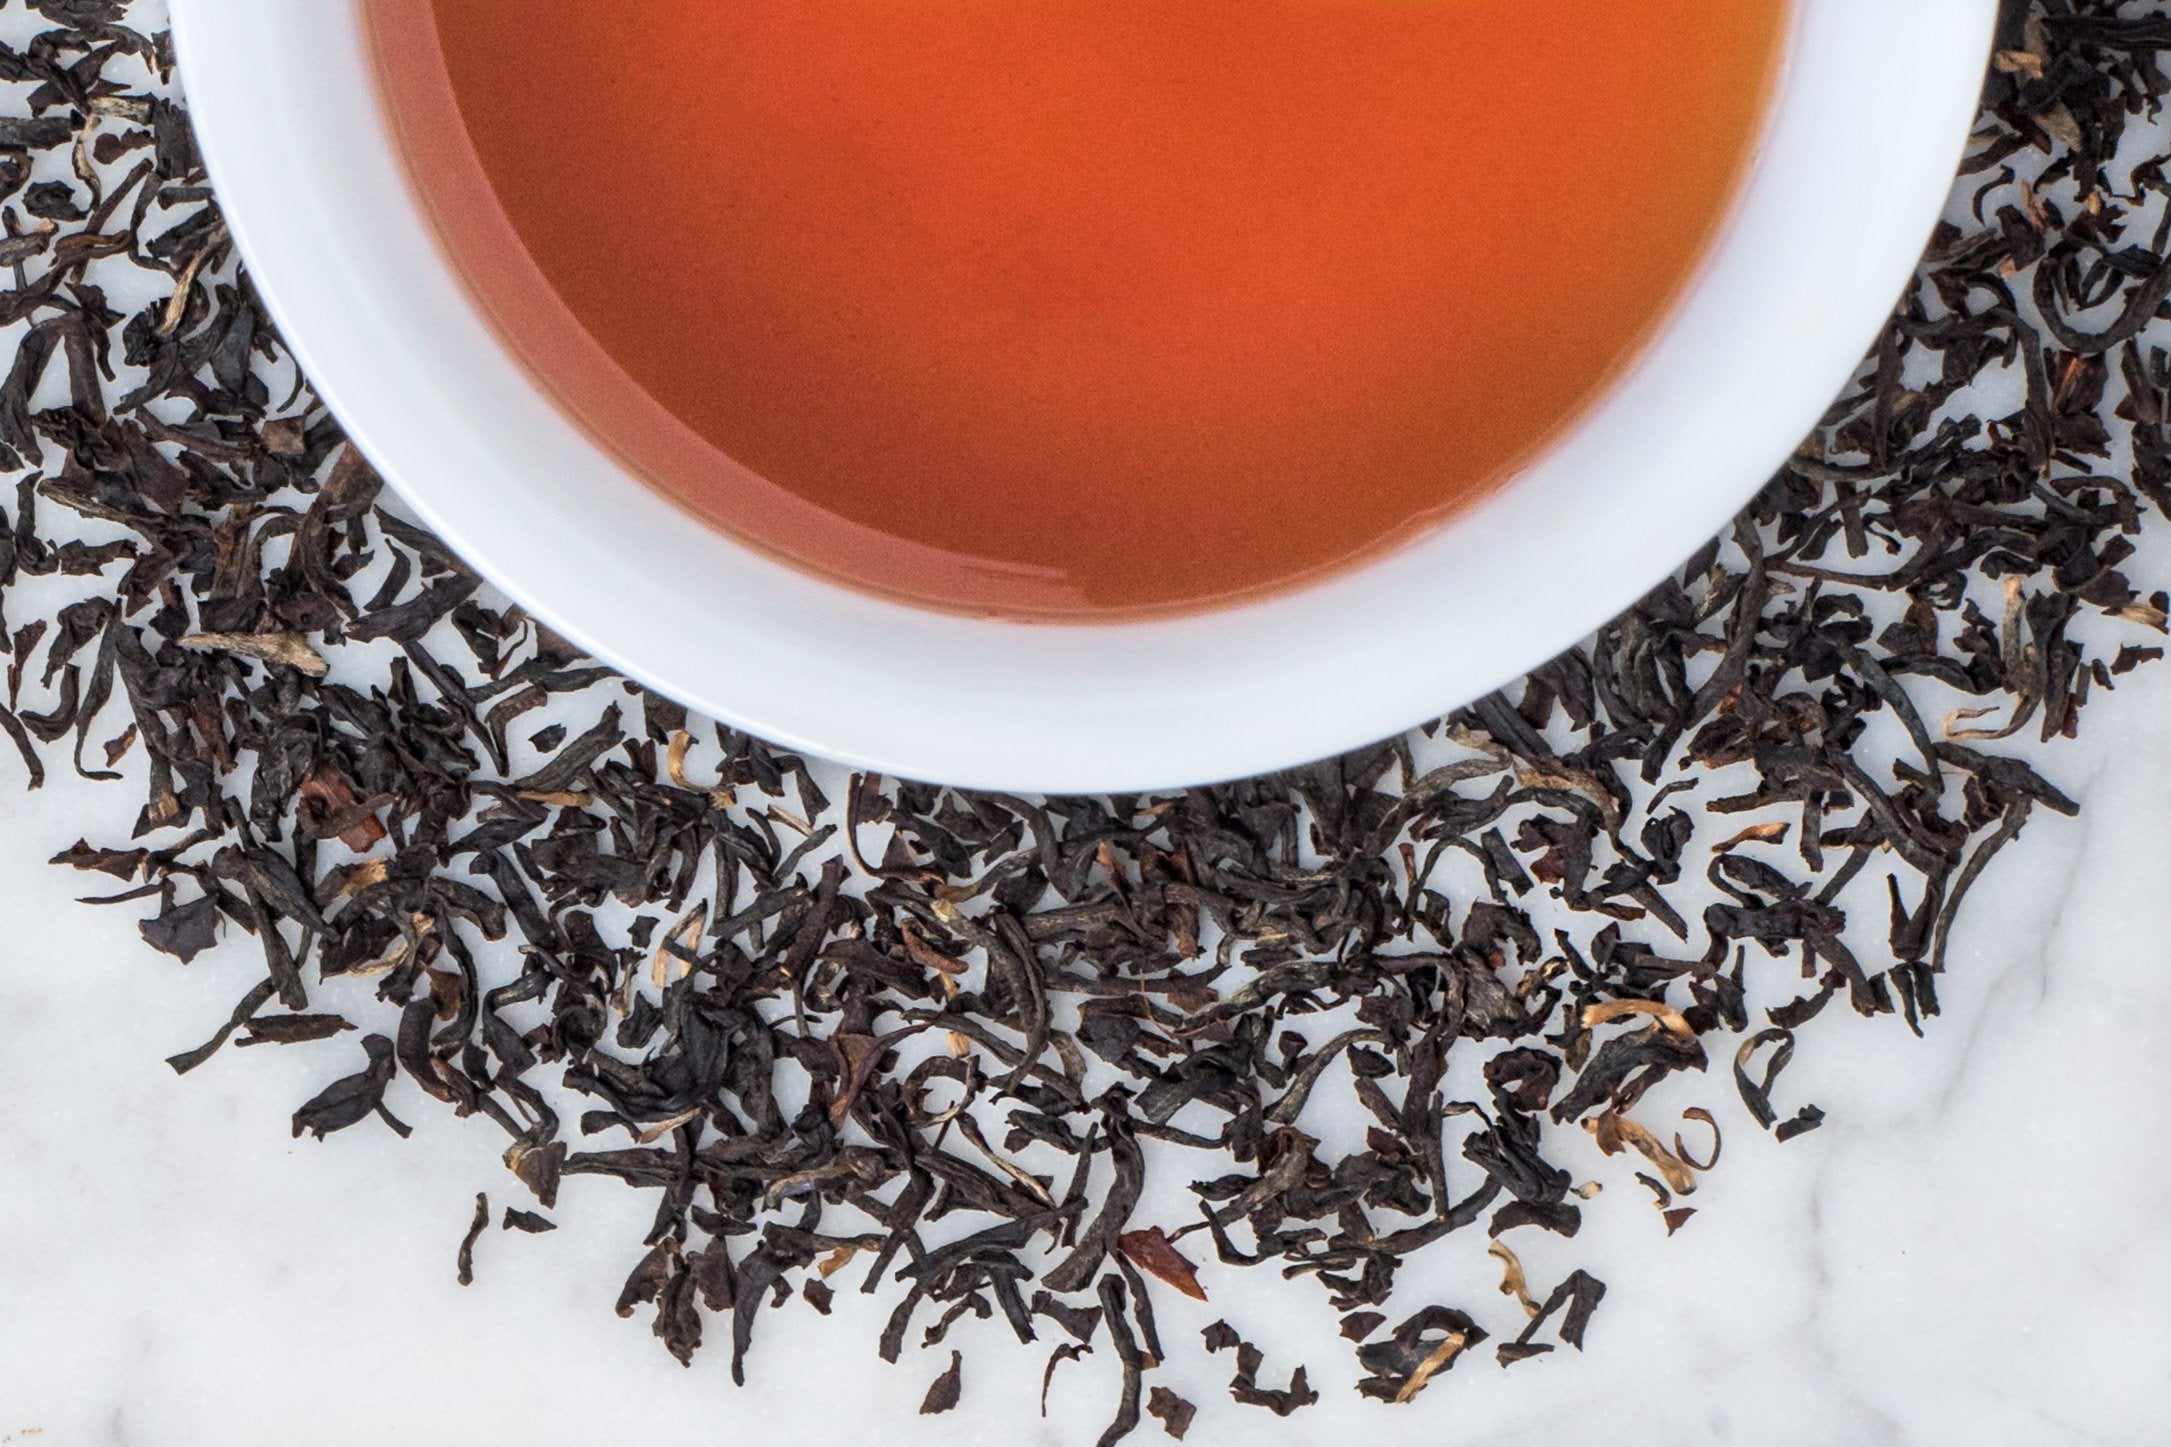 Robust Whole Assamica Black Tea Leaves Surround a Cup Of Red Tea Liquor